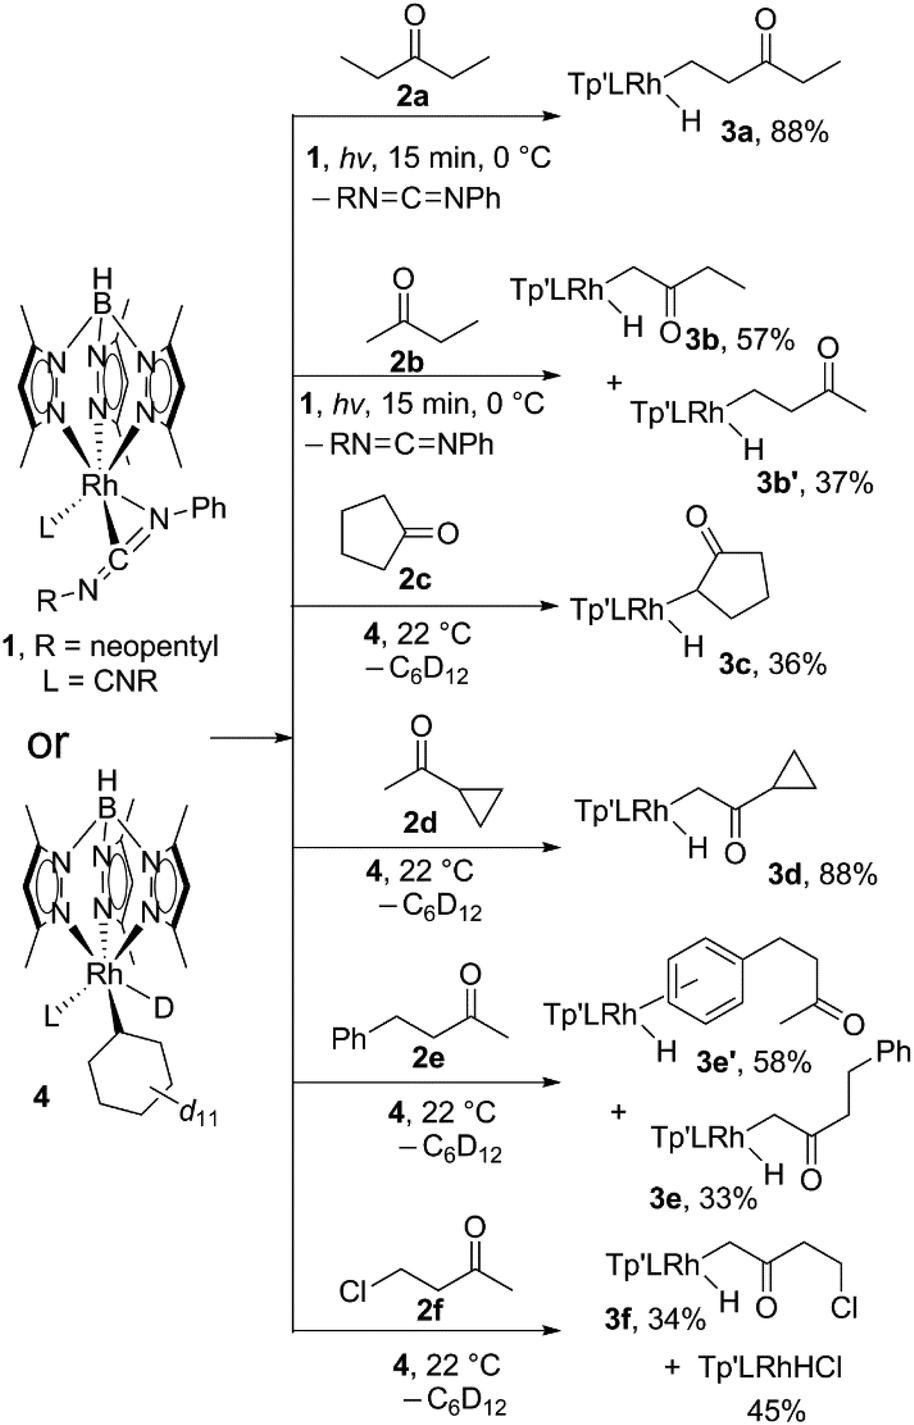 Photolysis Of Tp Rh Cnneopentyl Phncnneopentyl In The Presence Of Ketones And Esters Kinetic And Thermodynamic Selectivity For Activation Of Different Aliphatic C H Bonds Dalton Transactions Rsc Publishing